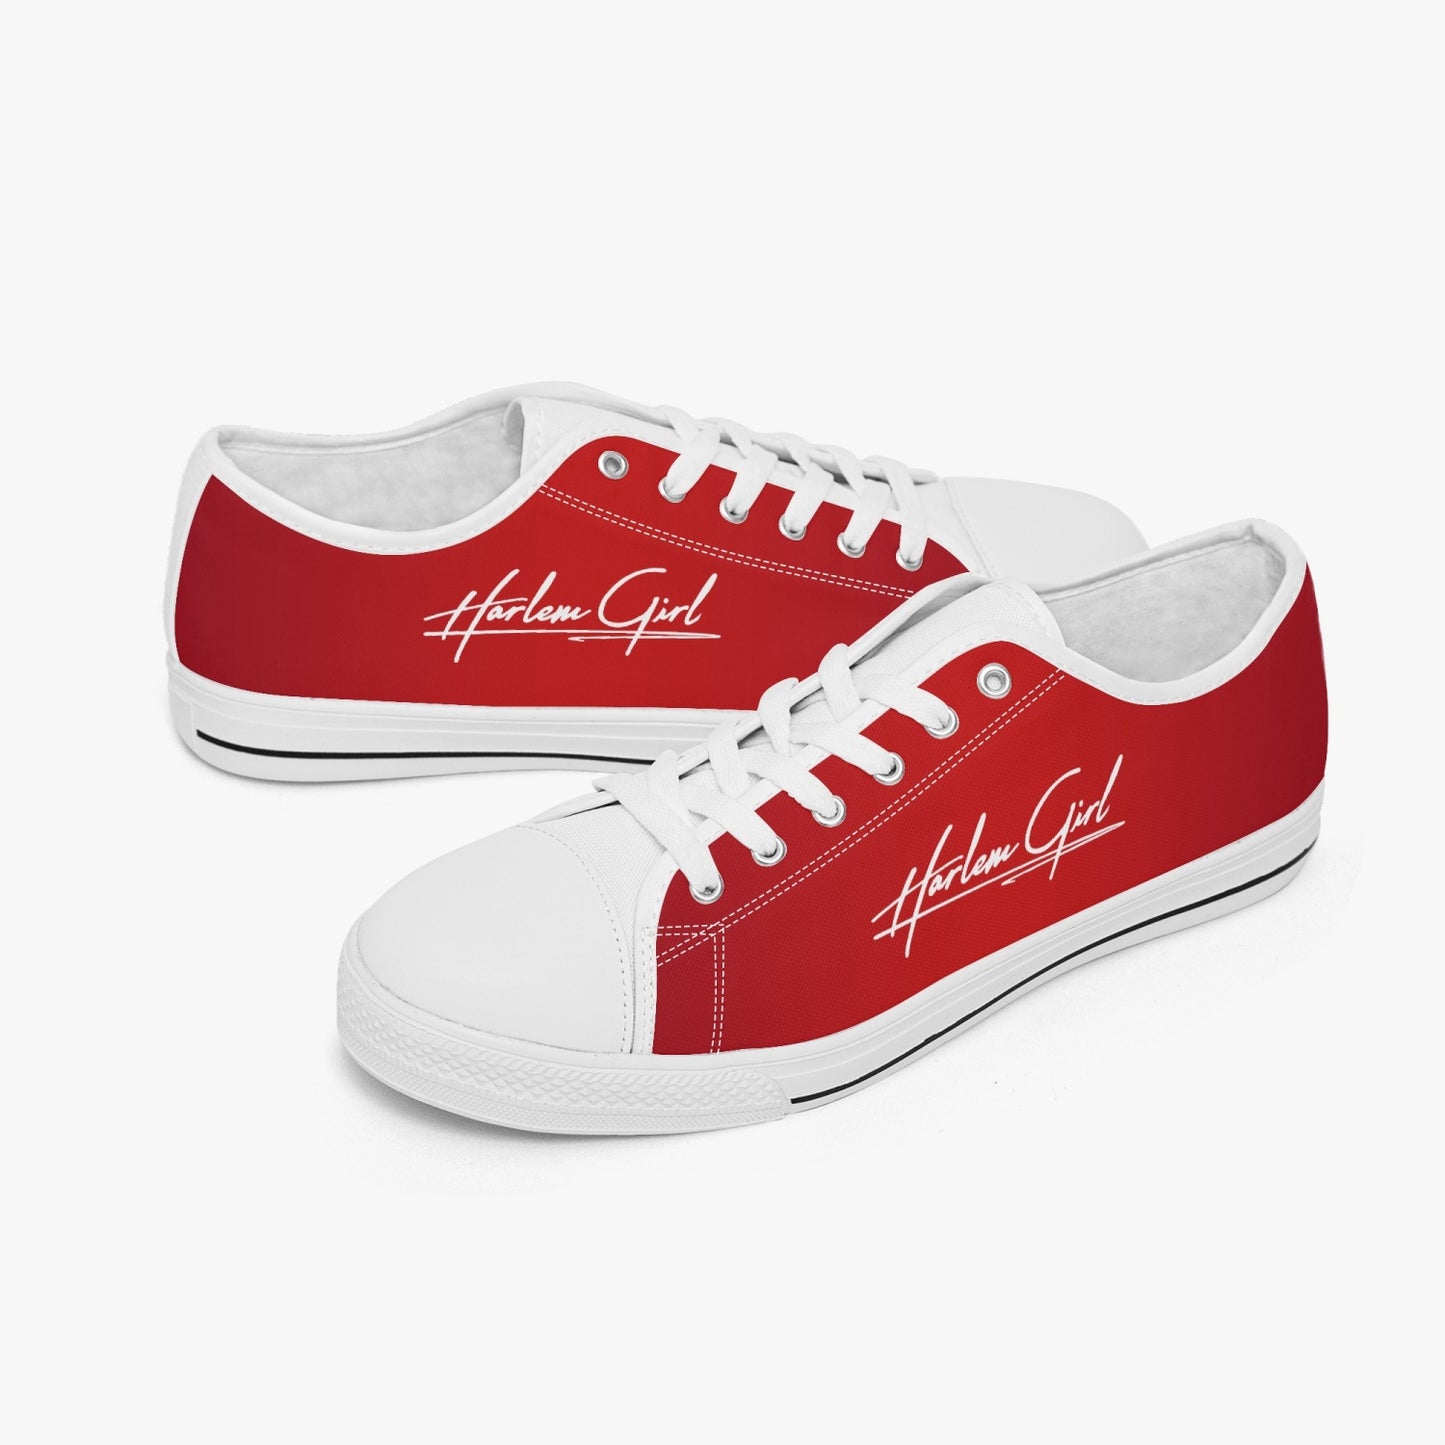 Harlem Girl "Coolee High" Womens Low-Top Canvas Sneaks - Ruby